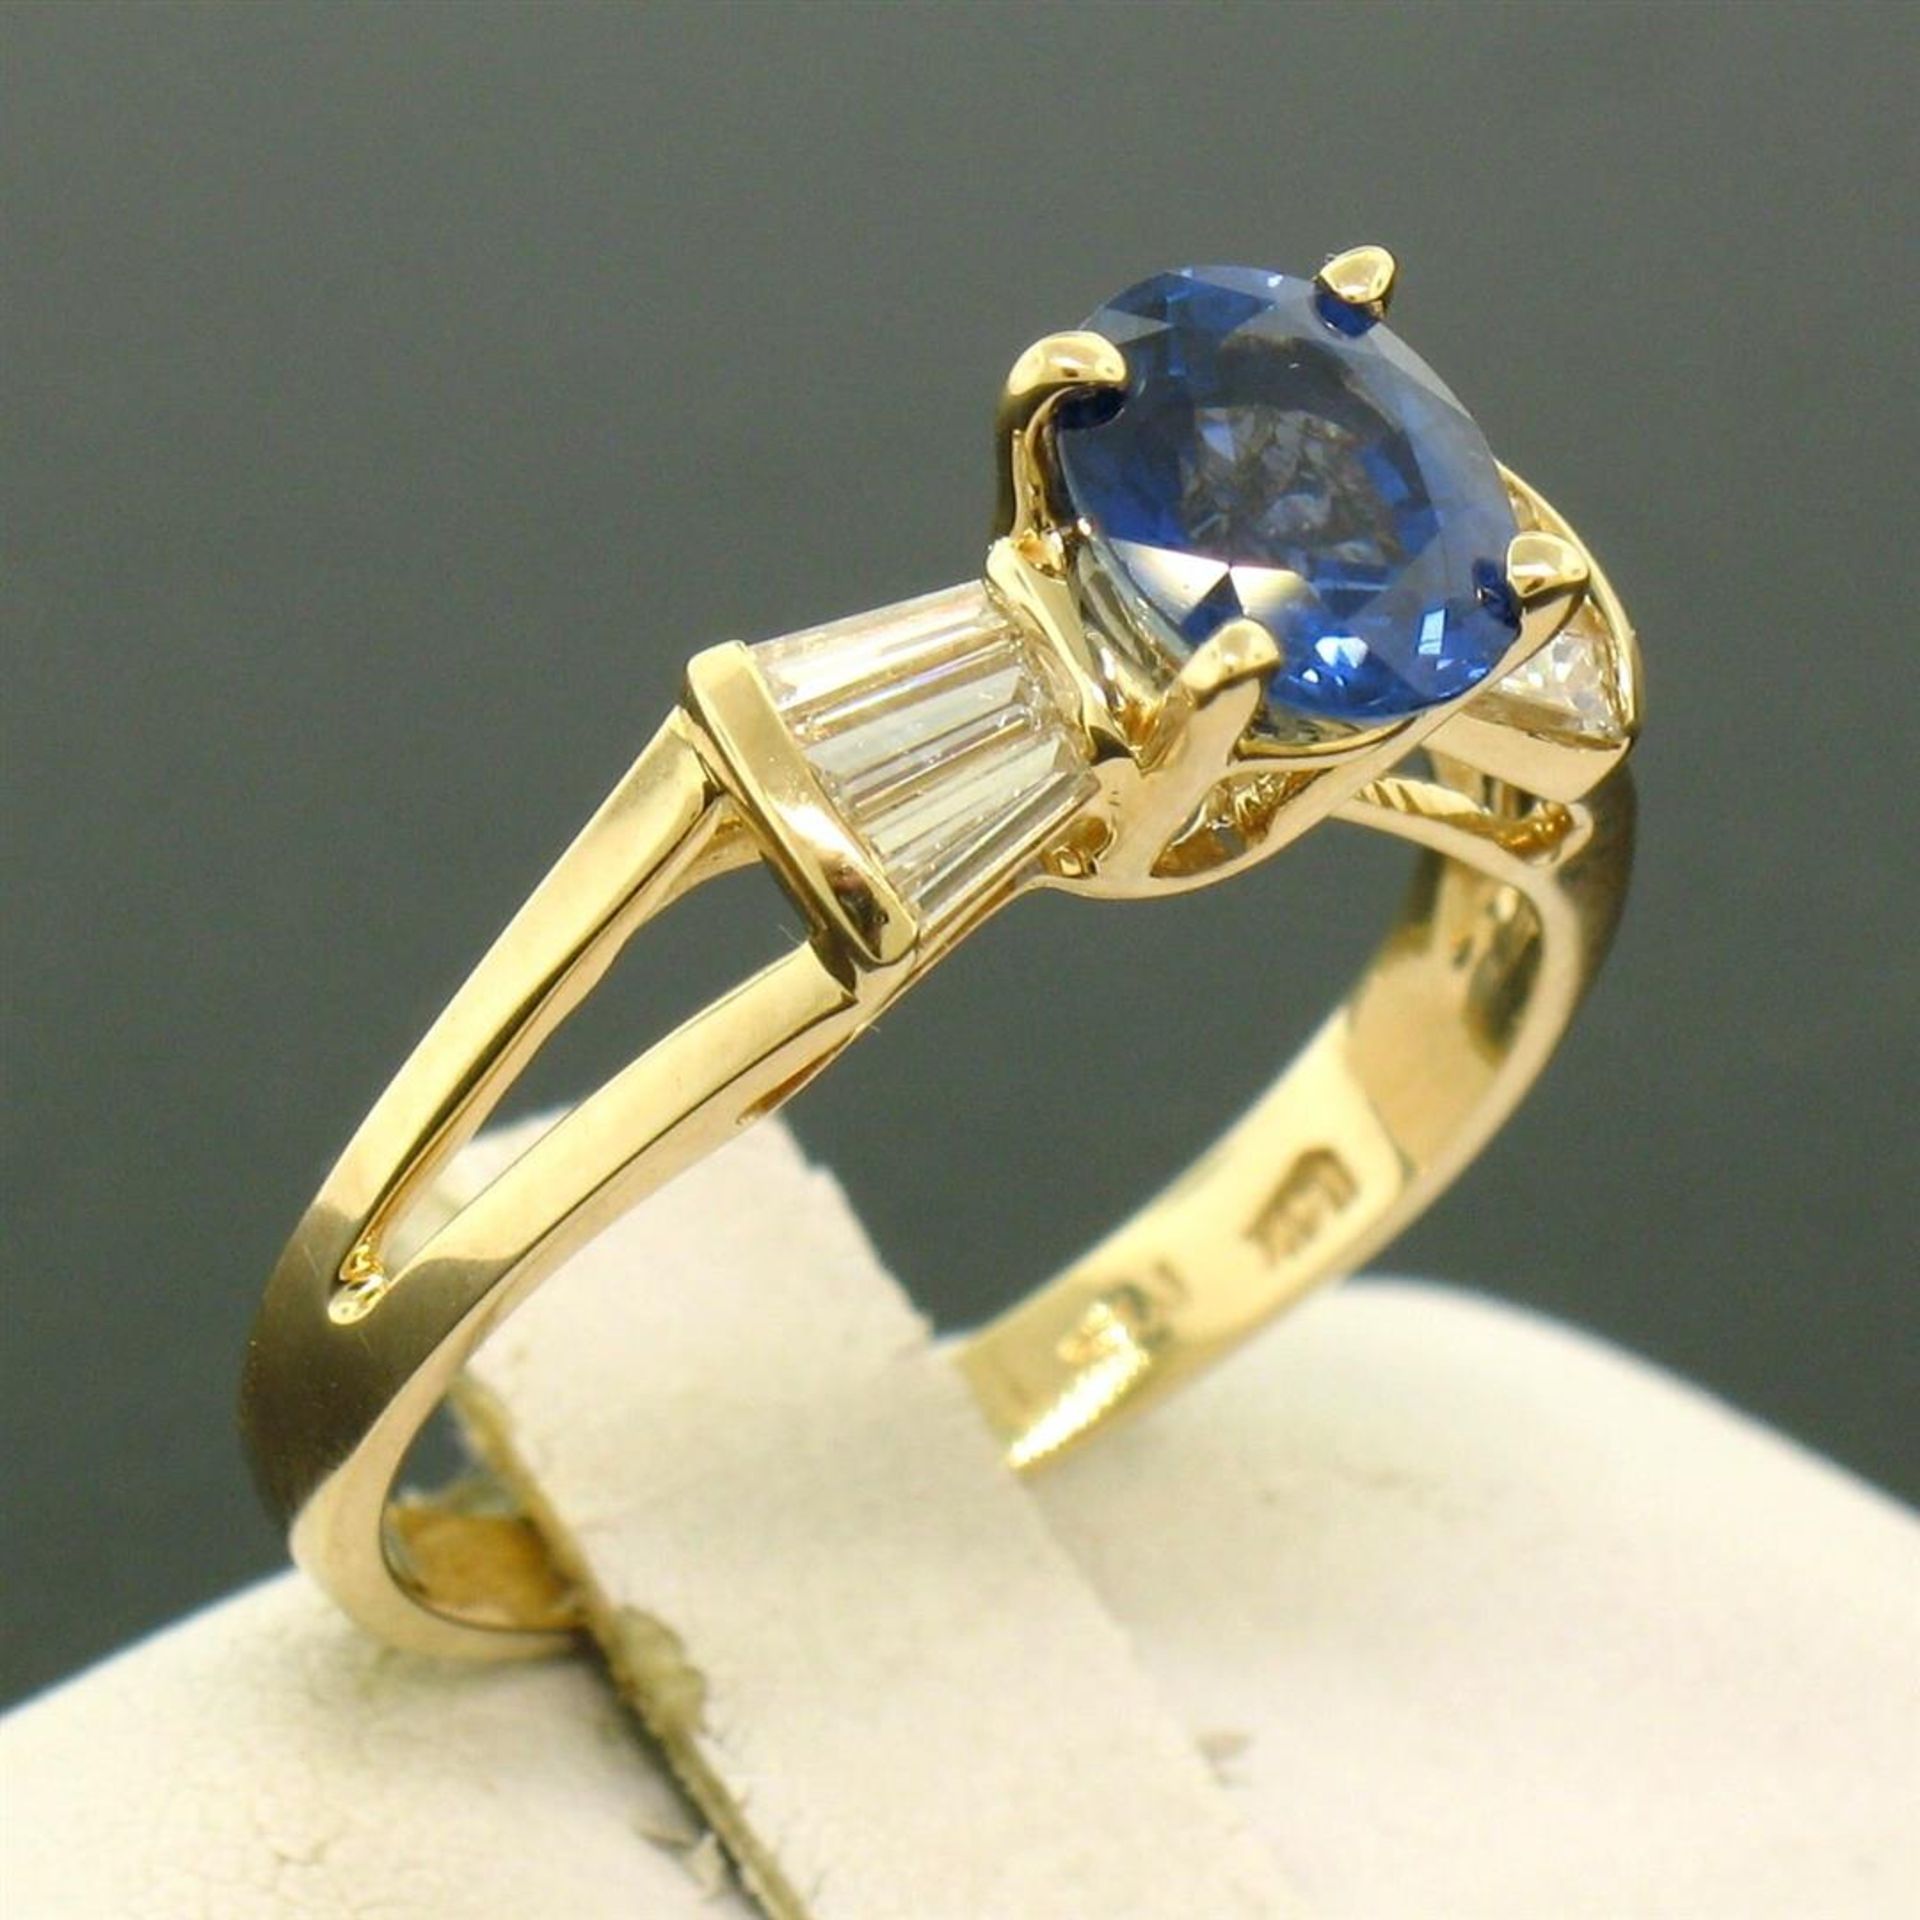 14k Yellow Gold ROYAL BLUE Sapphire Solitaire Ring Fine Baguette Diamond Accents - Image 7 of 9